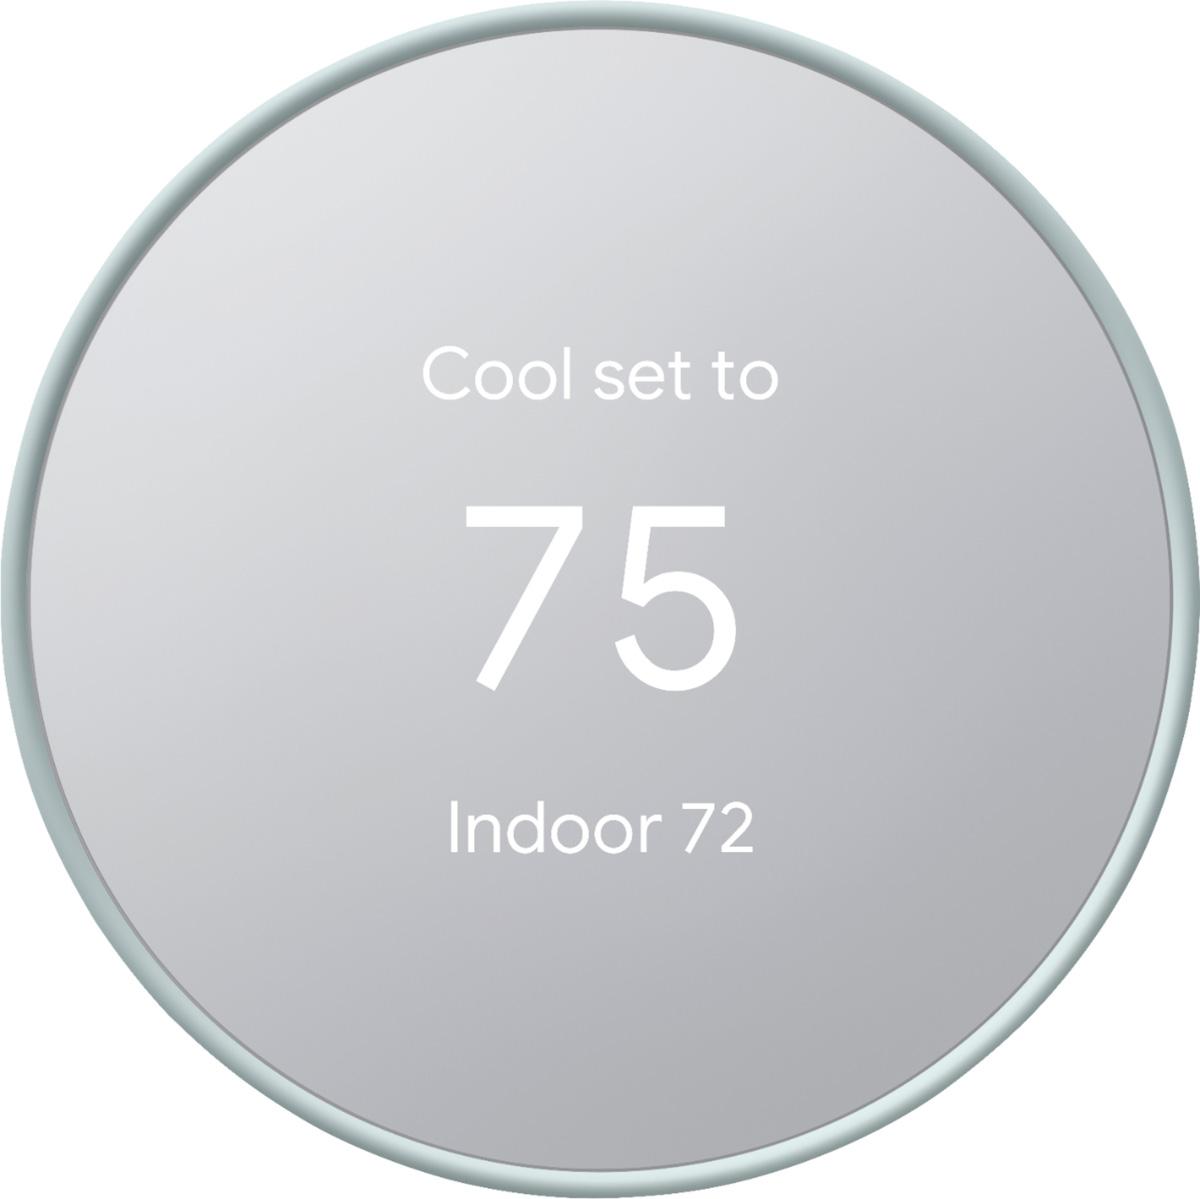 Google Nest Smart Programmable Wi-Fi Thermostat for $59.99 Shipped